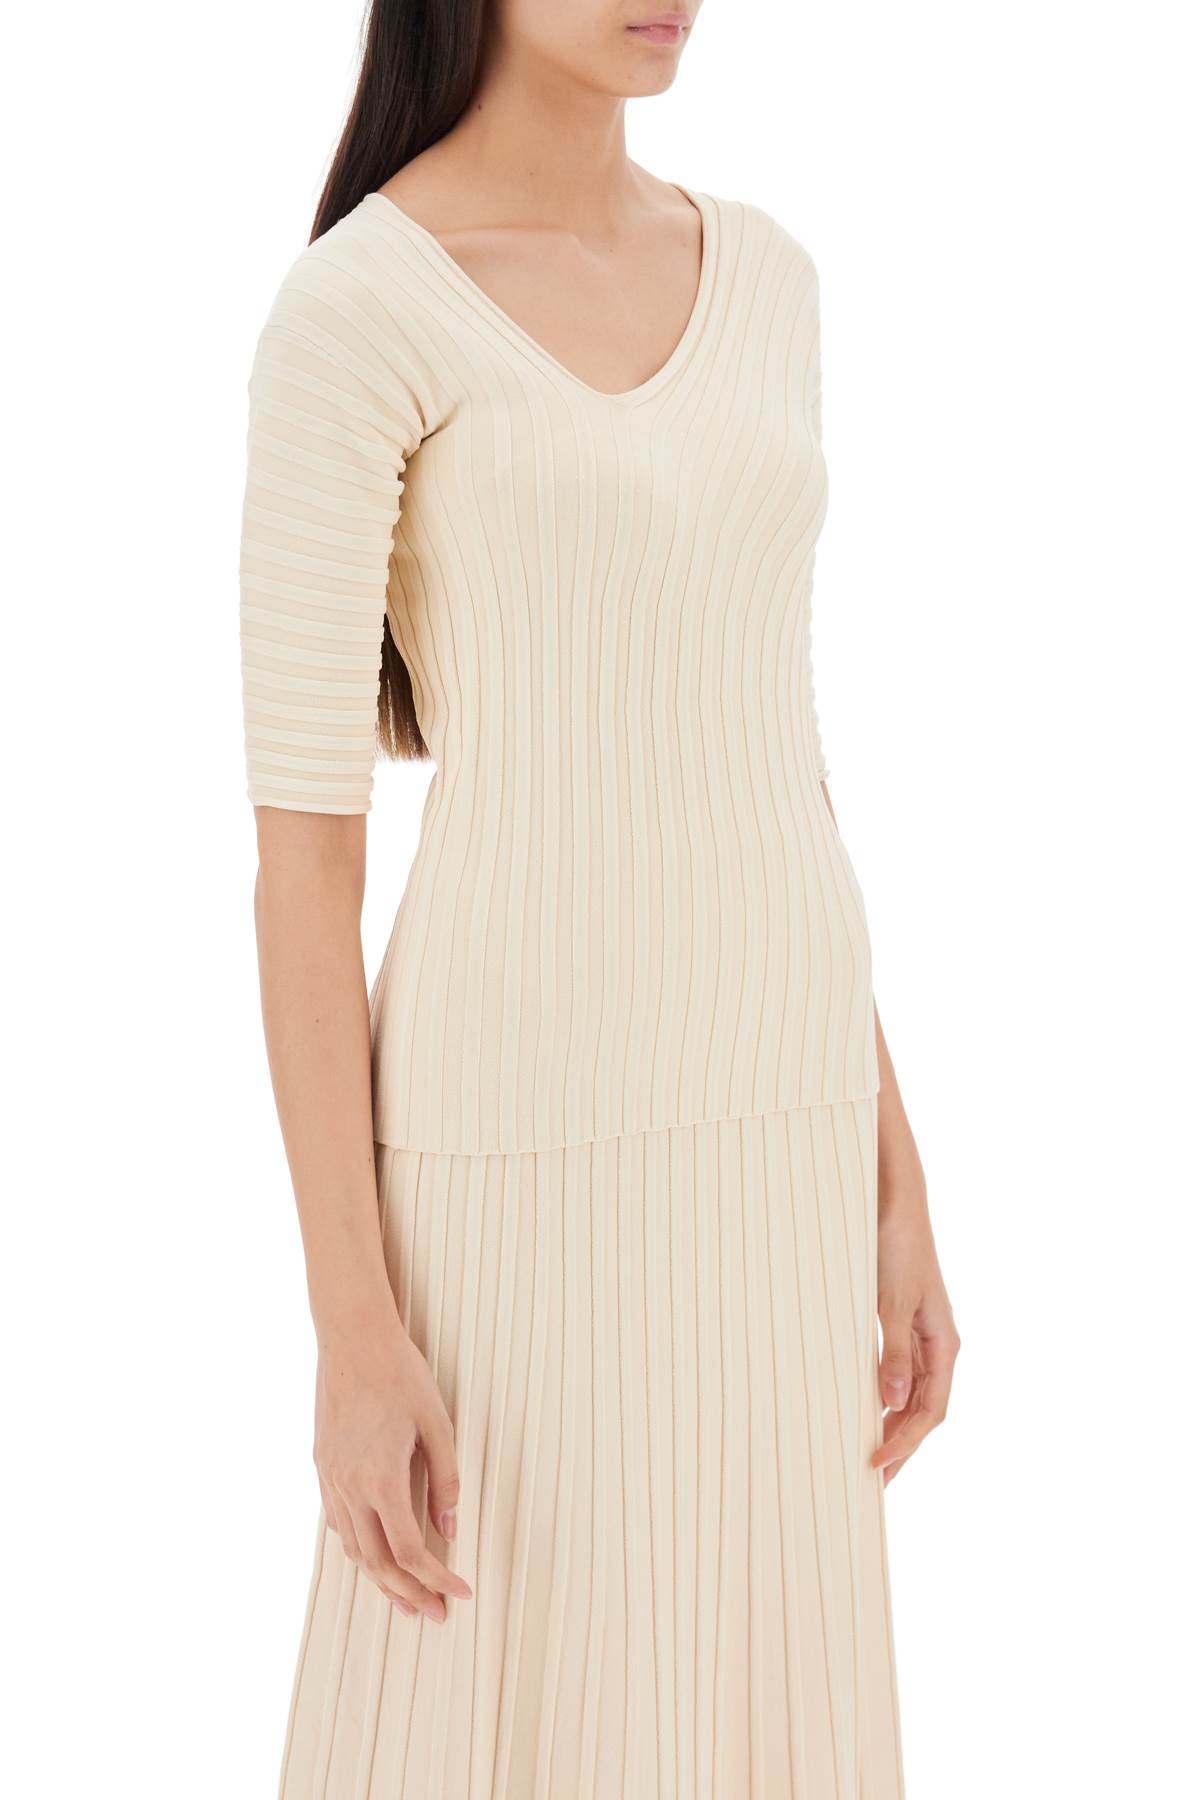 Shop By Malene Birger Ivena Ribbed Top With Asymmetrical Neckline In Soft White (beige)